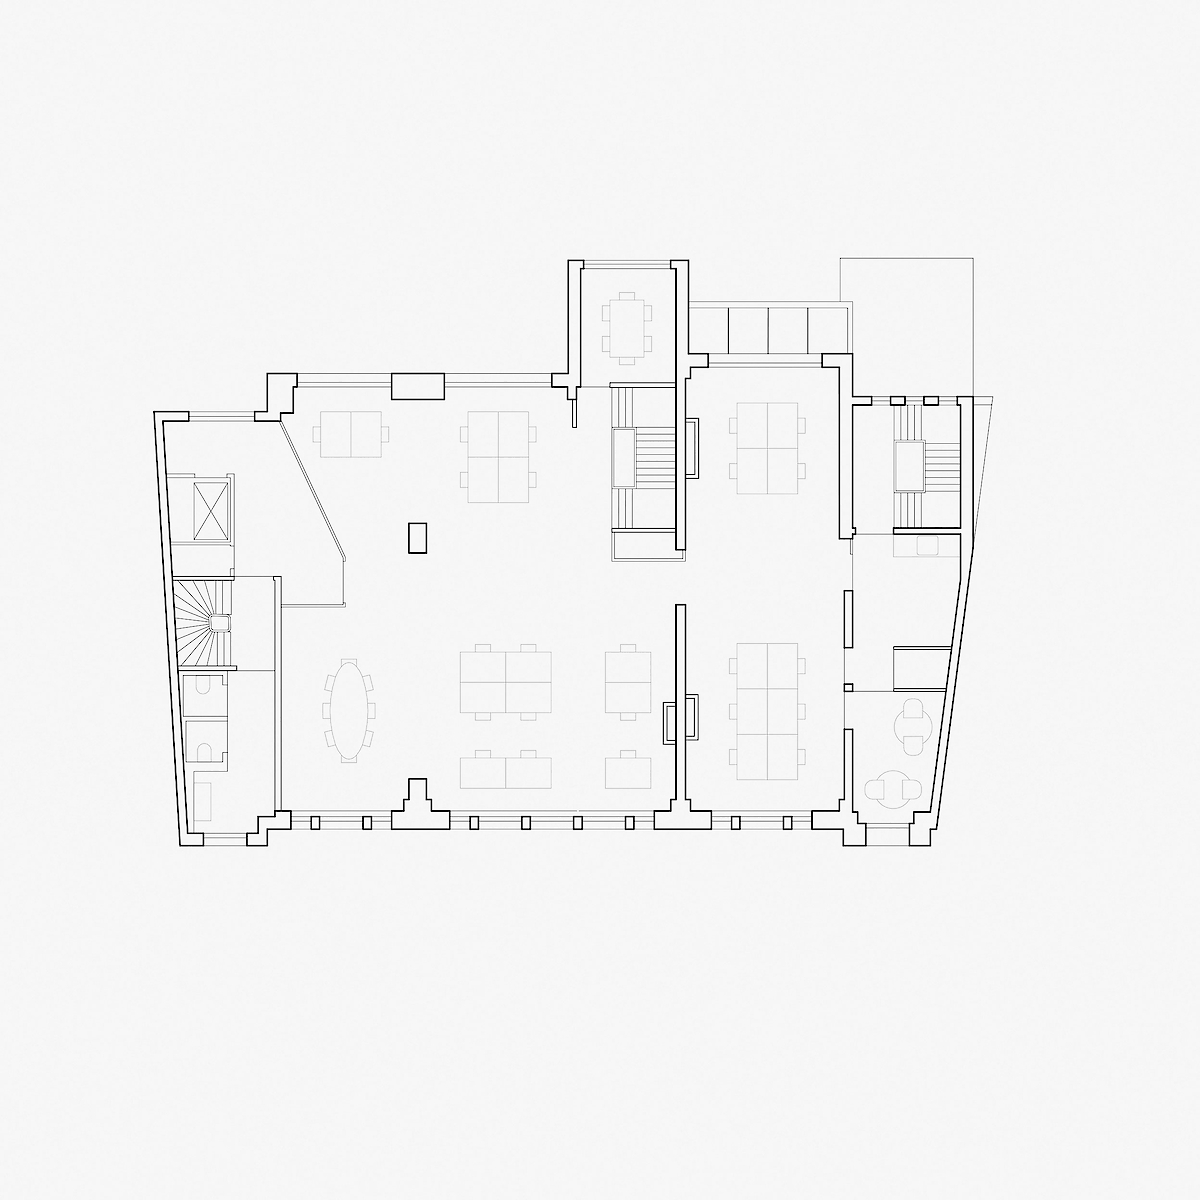 Second floor with open layout